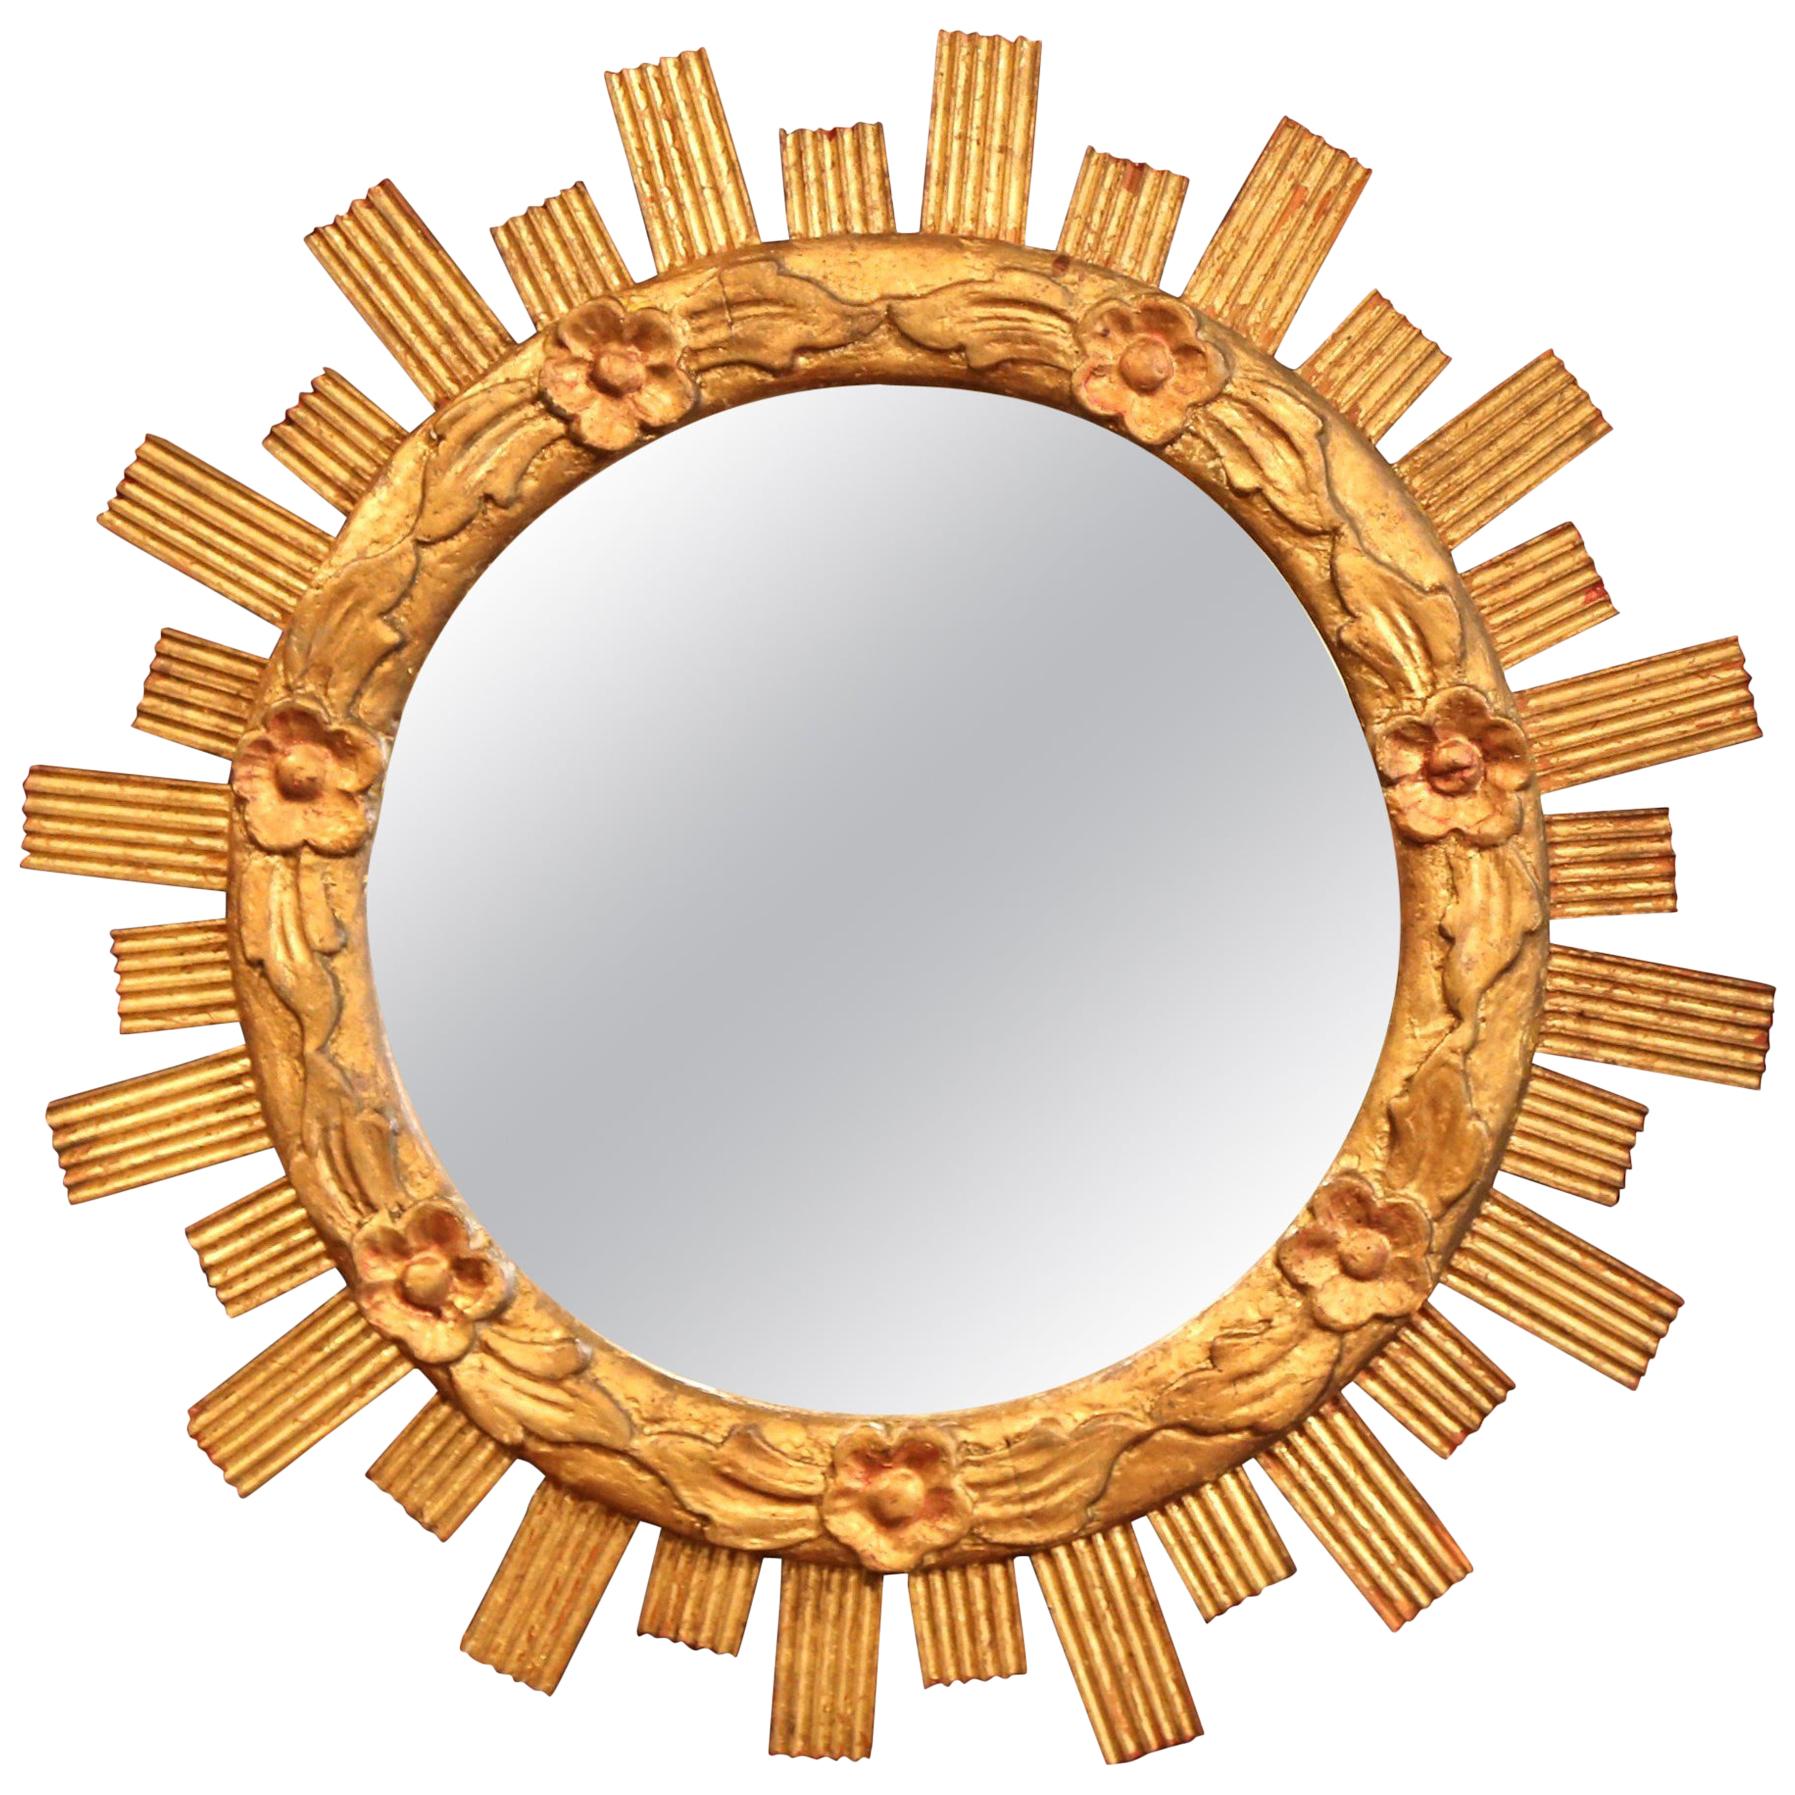 Mid-20th Century French Carved Giltwood Sunburst Mirror with Floral Decor